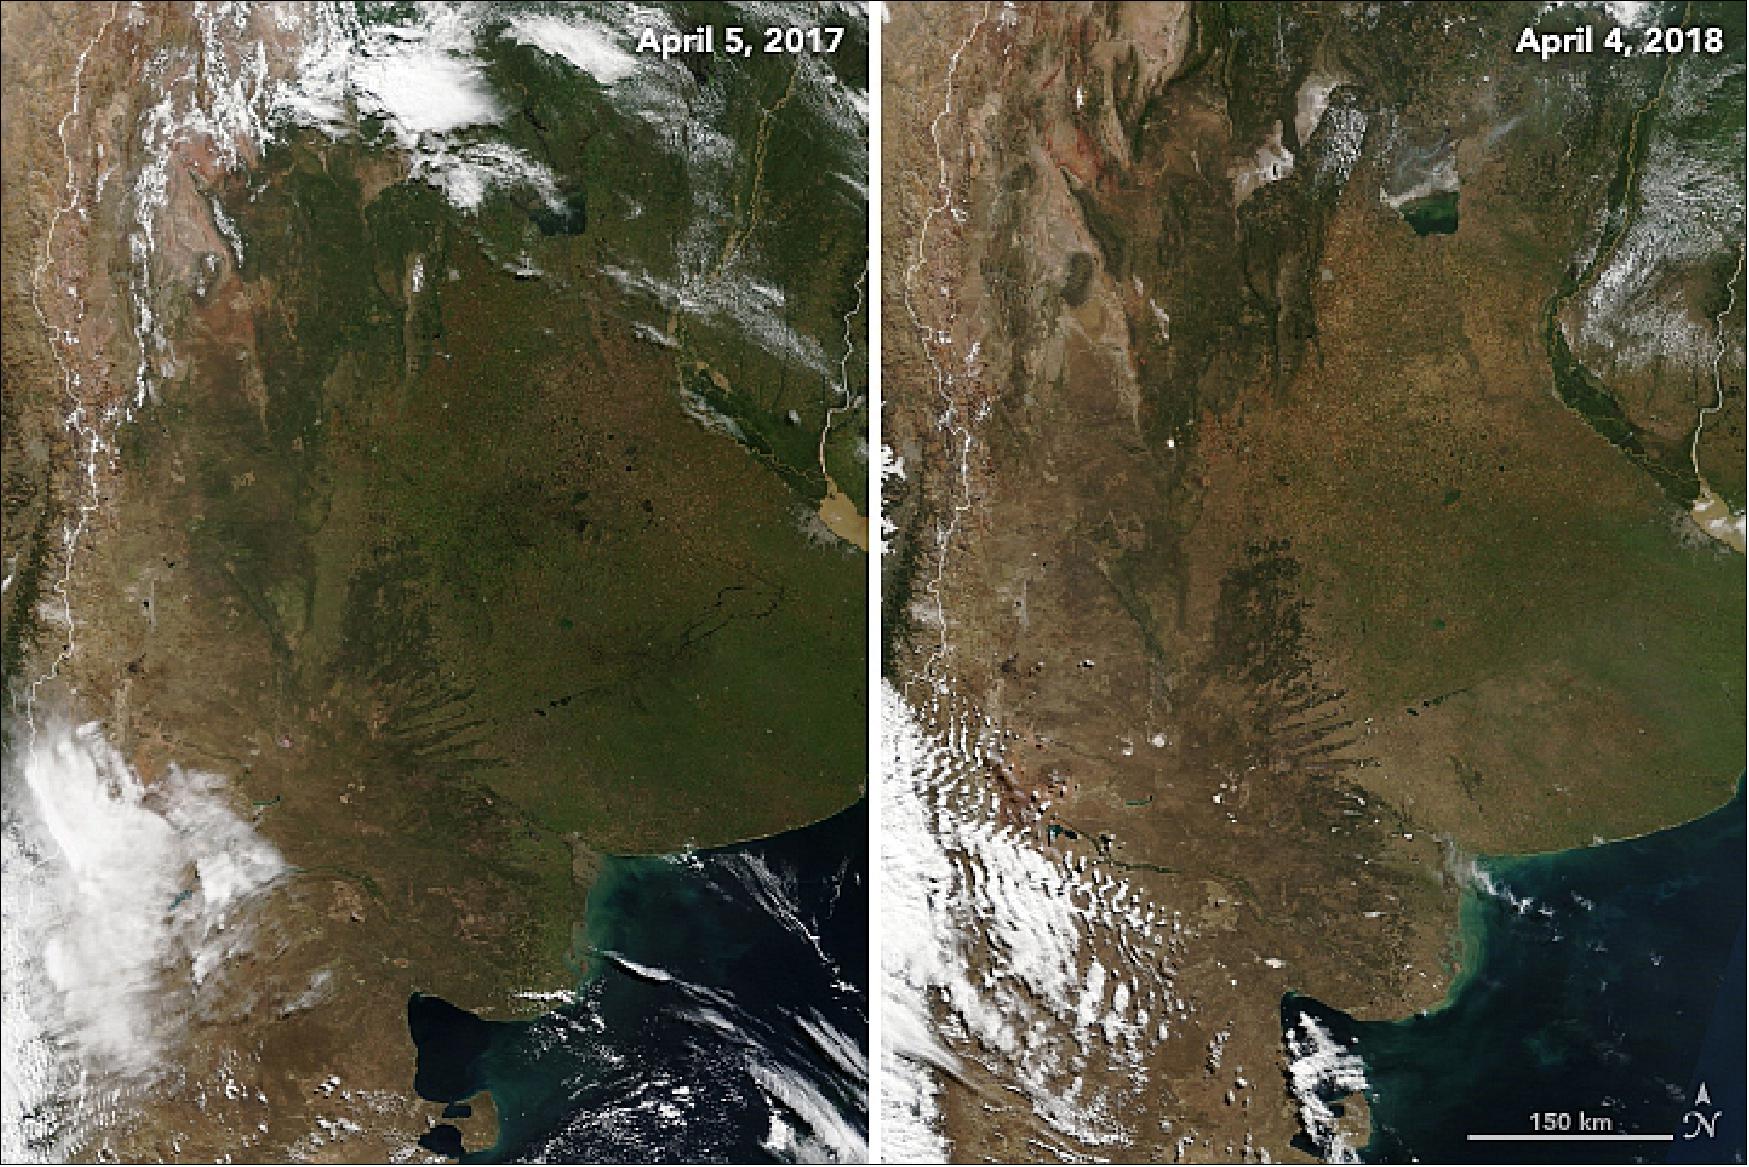 Figure 28: The MODIS instrument on NASA's Terra satellite captured these natural-color images of the flat, fertile Pampas region of central Argentina. The Pampas appeared lush and green in April 2017 (left) in contrast to the browner landscapes (right) visible one year later (image credit: NASA Earth Observatory, images by Joshua Stevens, using MODIS data from LANCE/EOSDIS Rapid Response. Story by Adam Voiland)